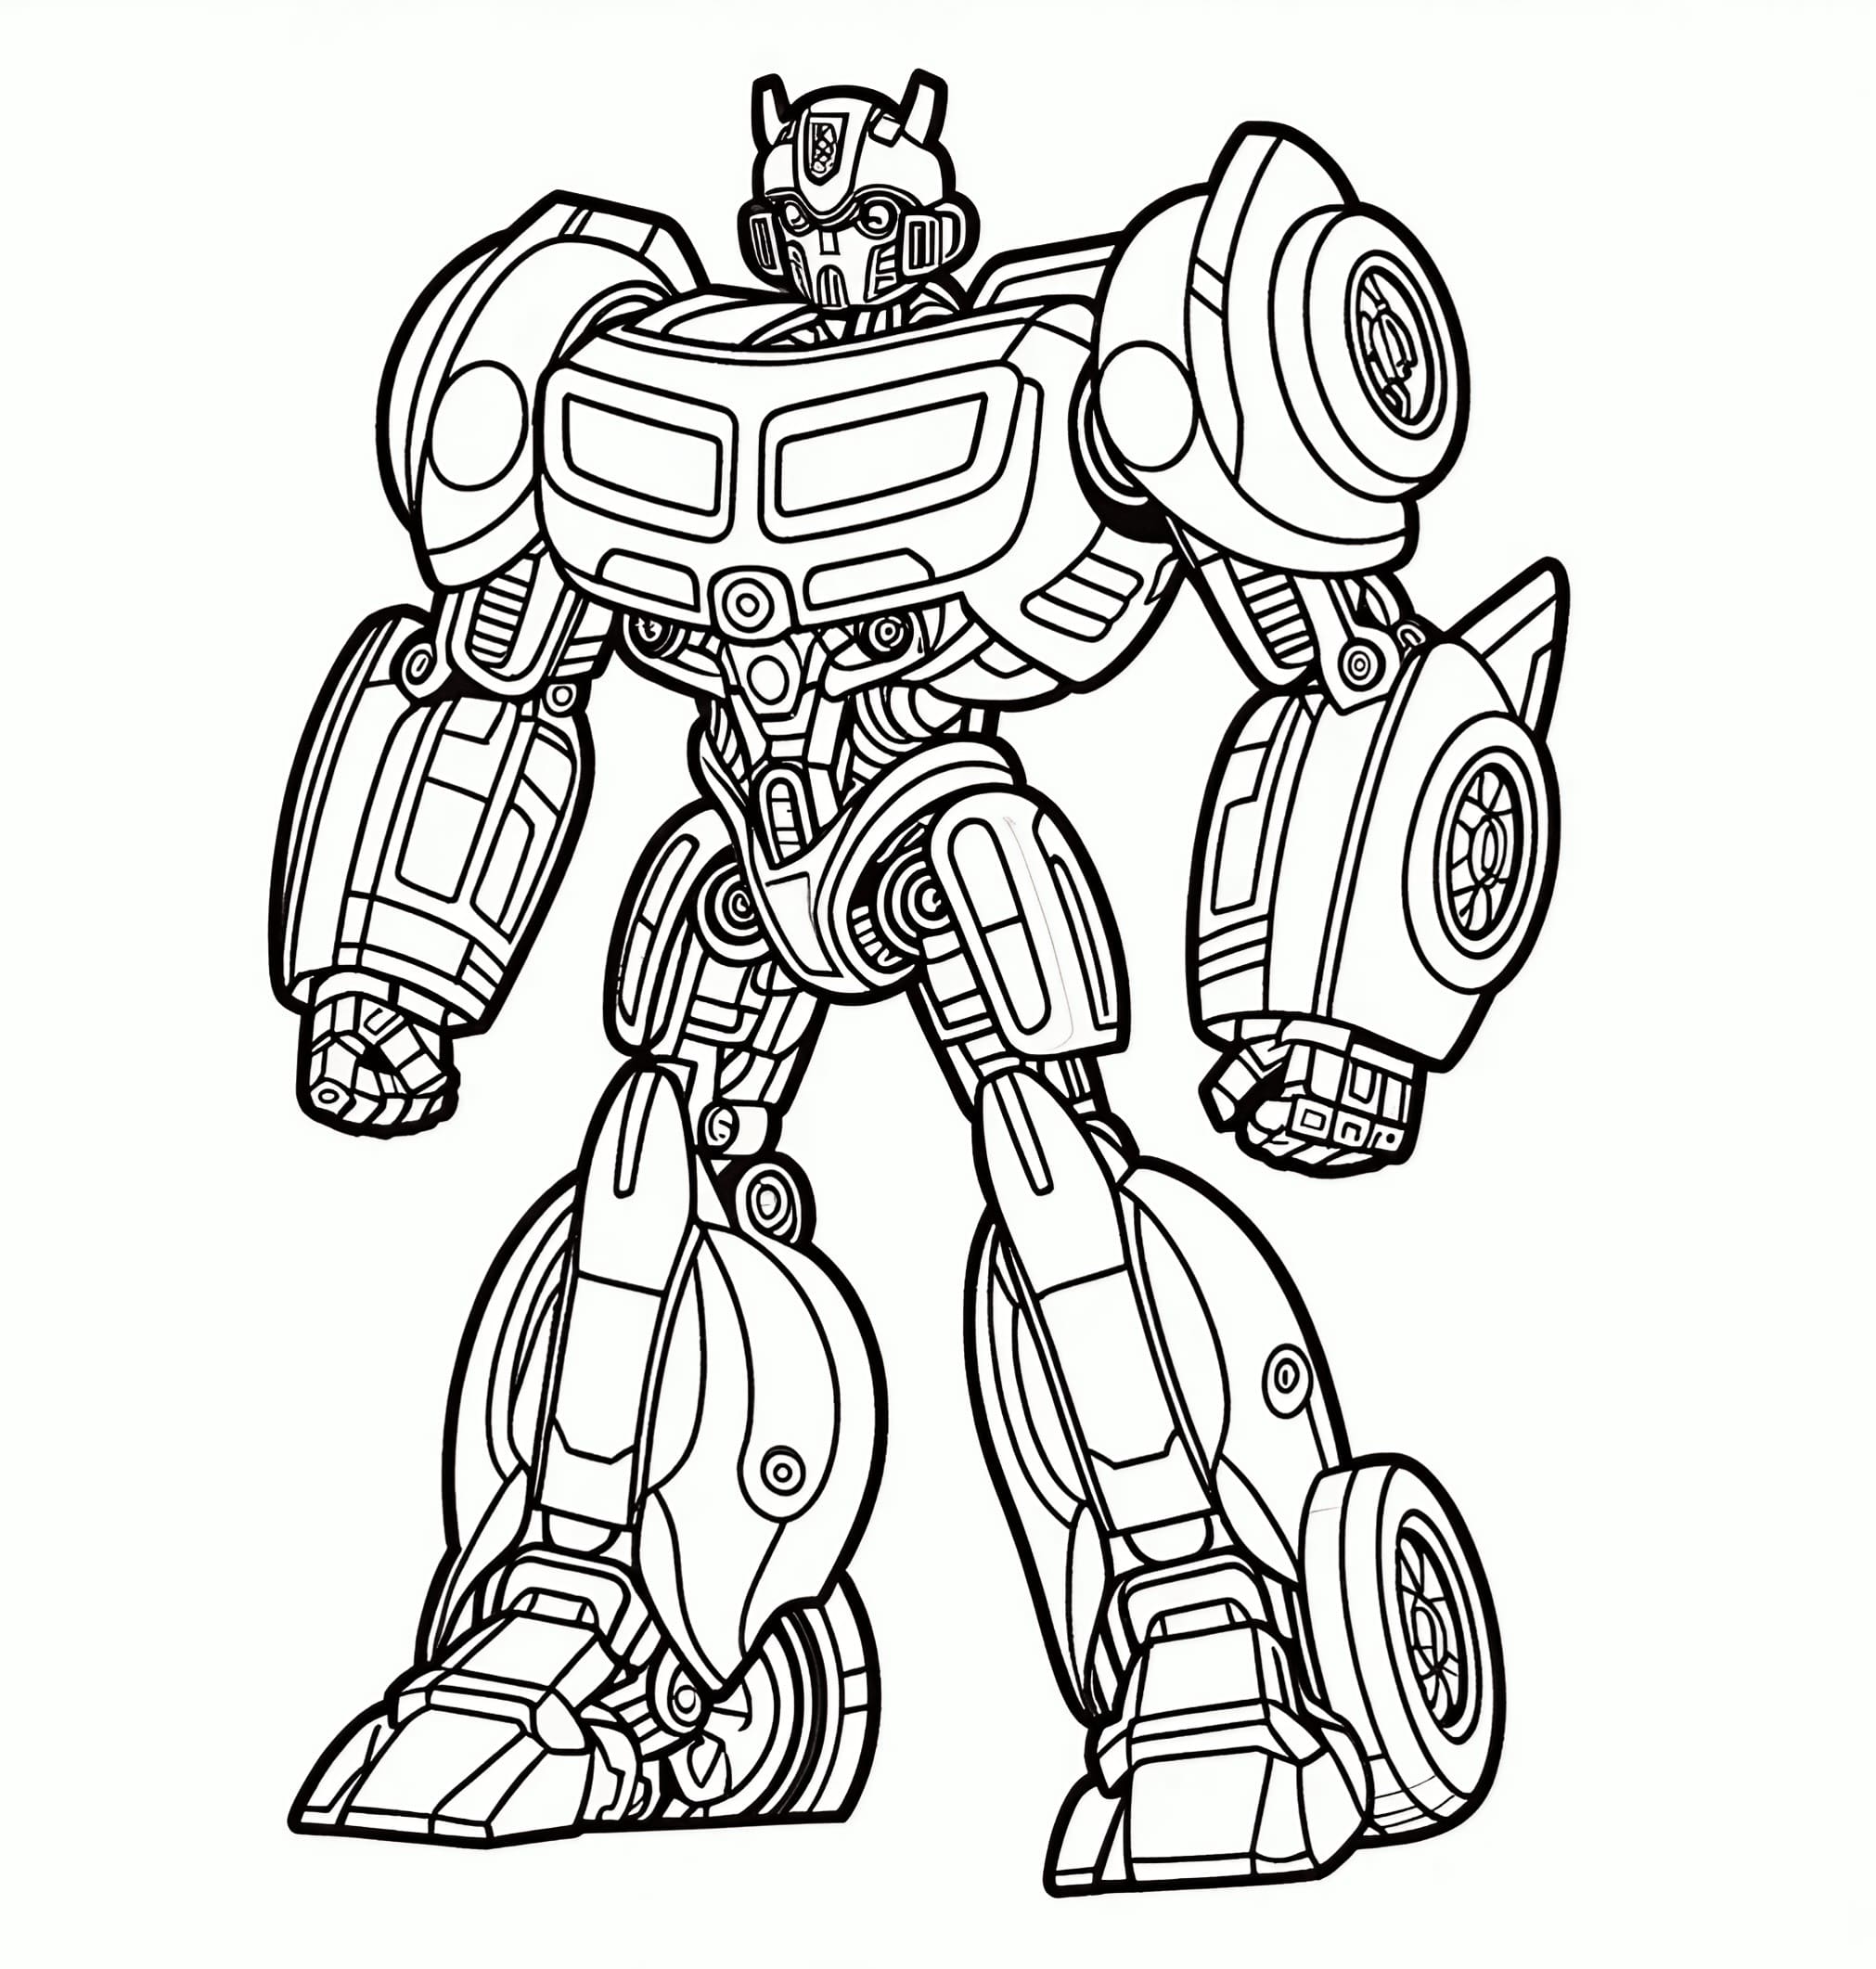 Bumblebee coloring pages for free printable